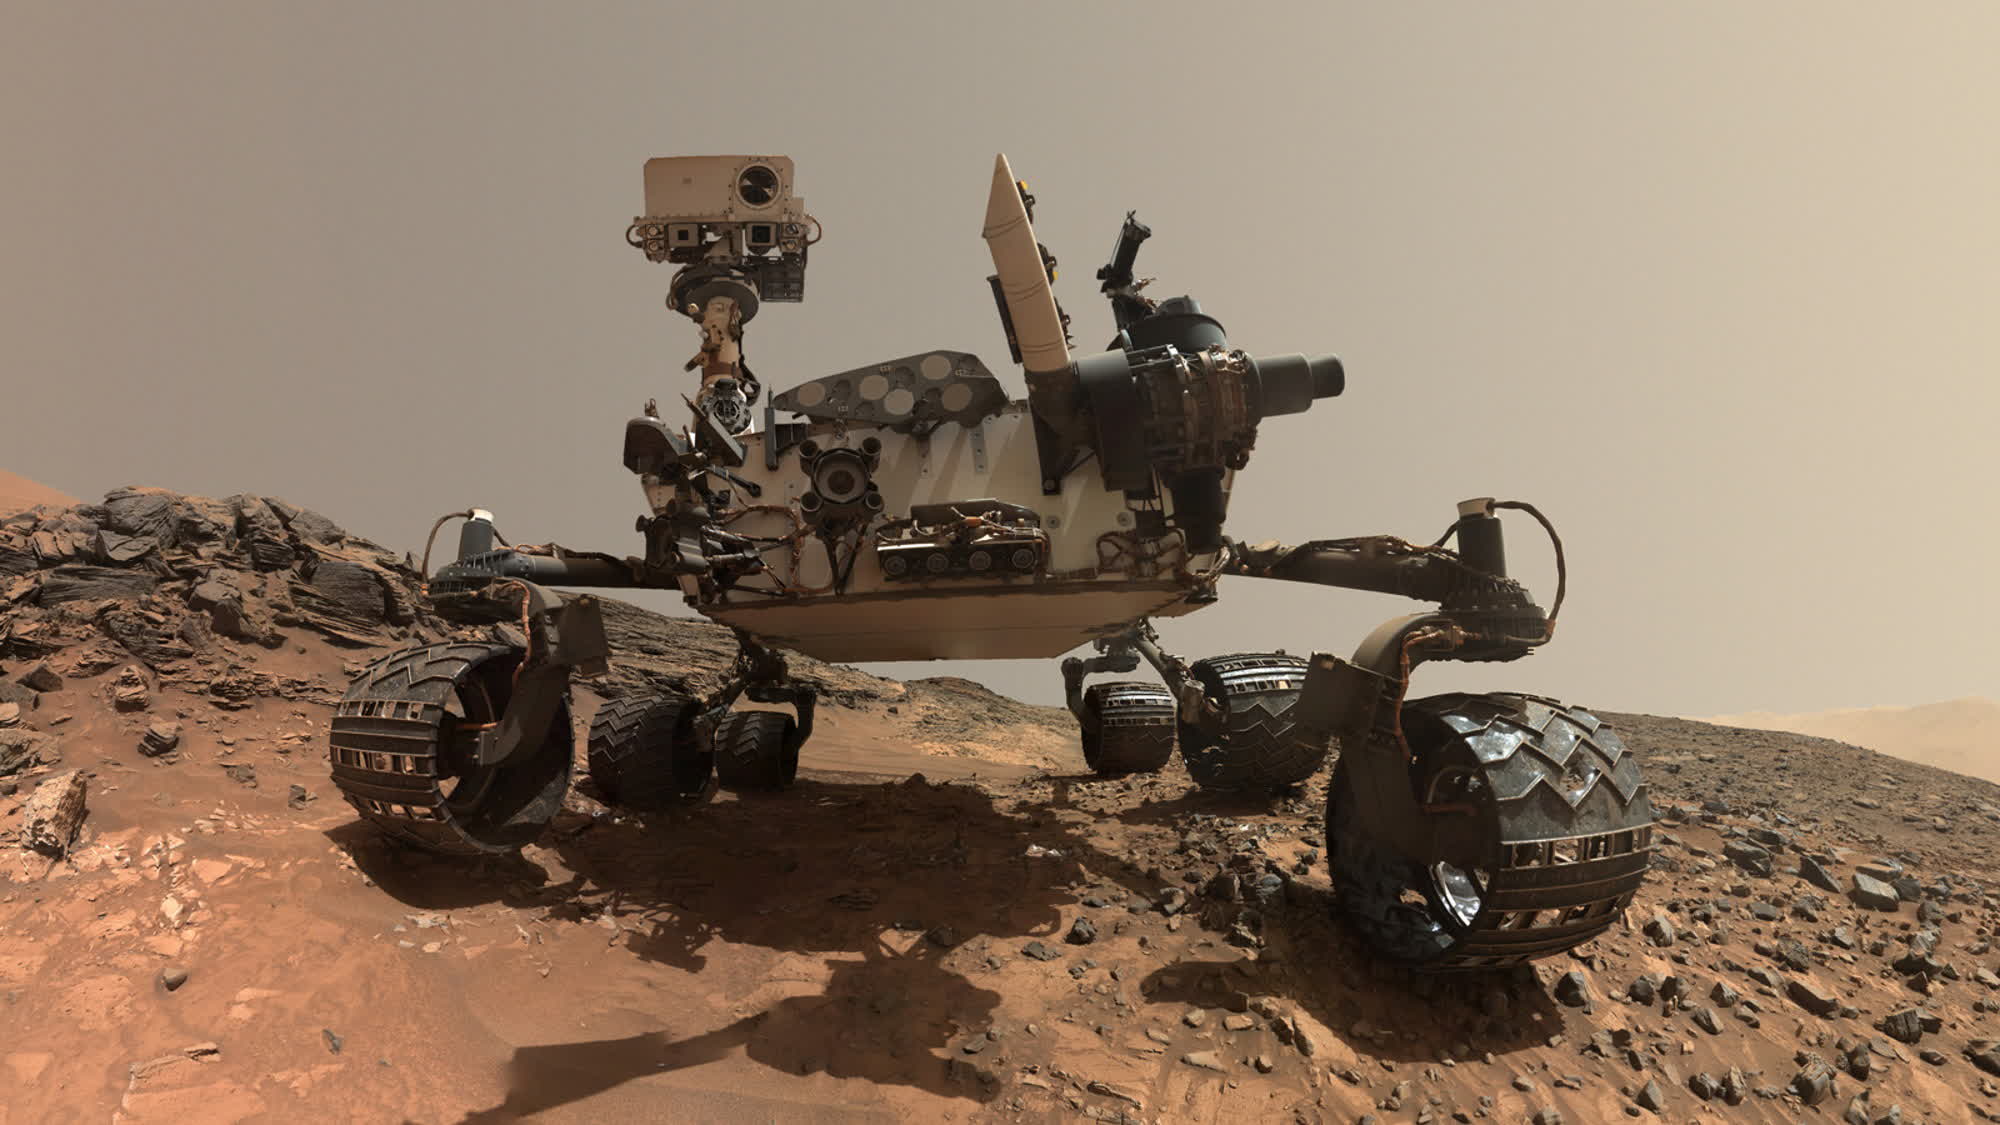 Curiosity Mars rover gets its latest interplanetary software patch